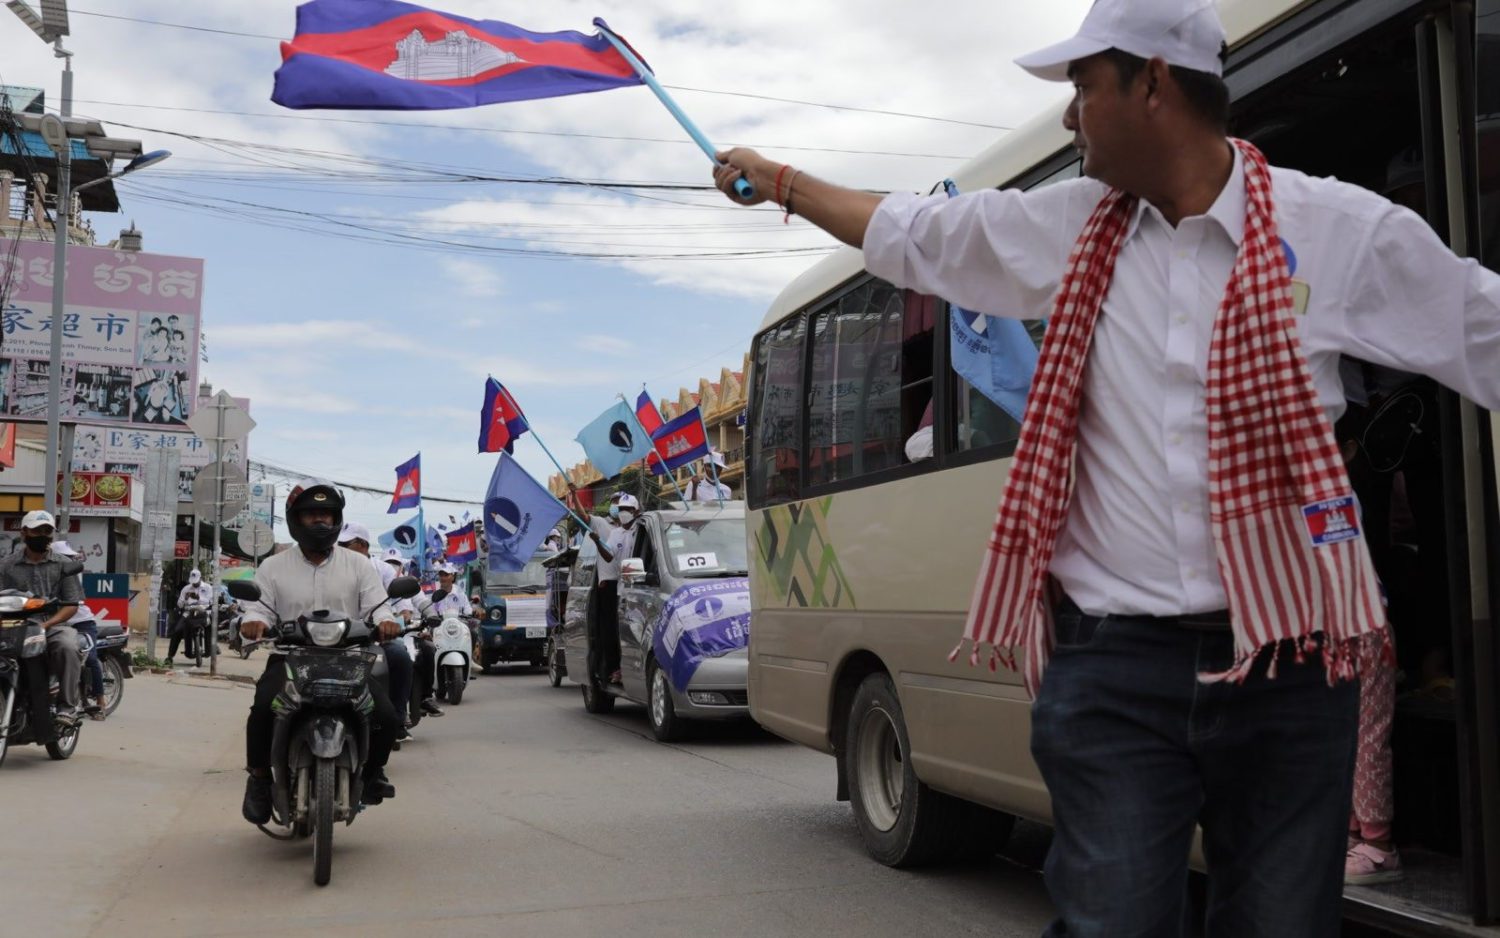 The Candlelight Party’s campaign rally in Phnom Penh on May 21, 2022. (Roun Ry/VOD)